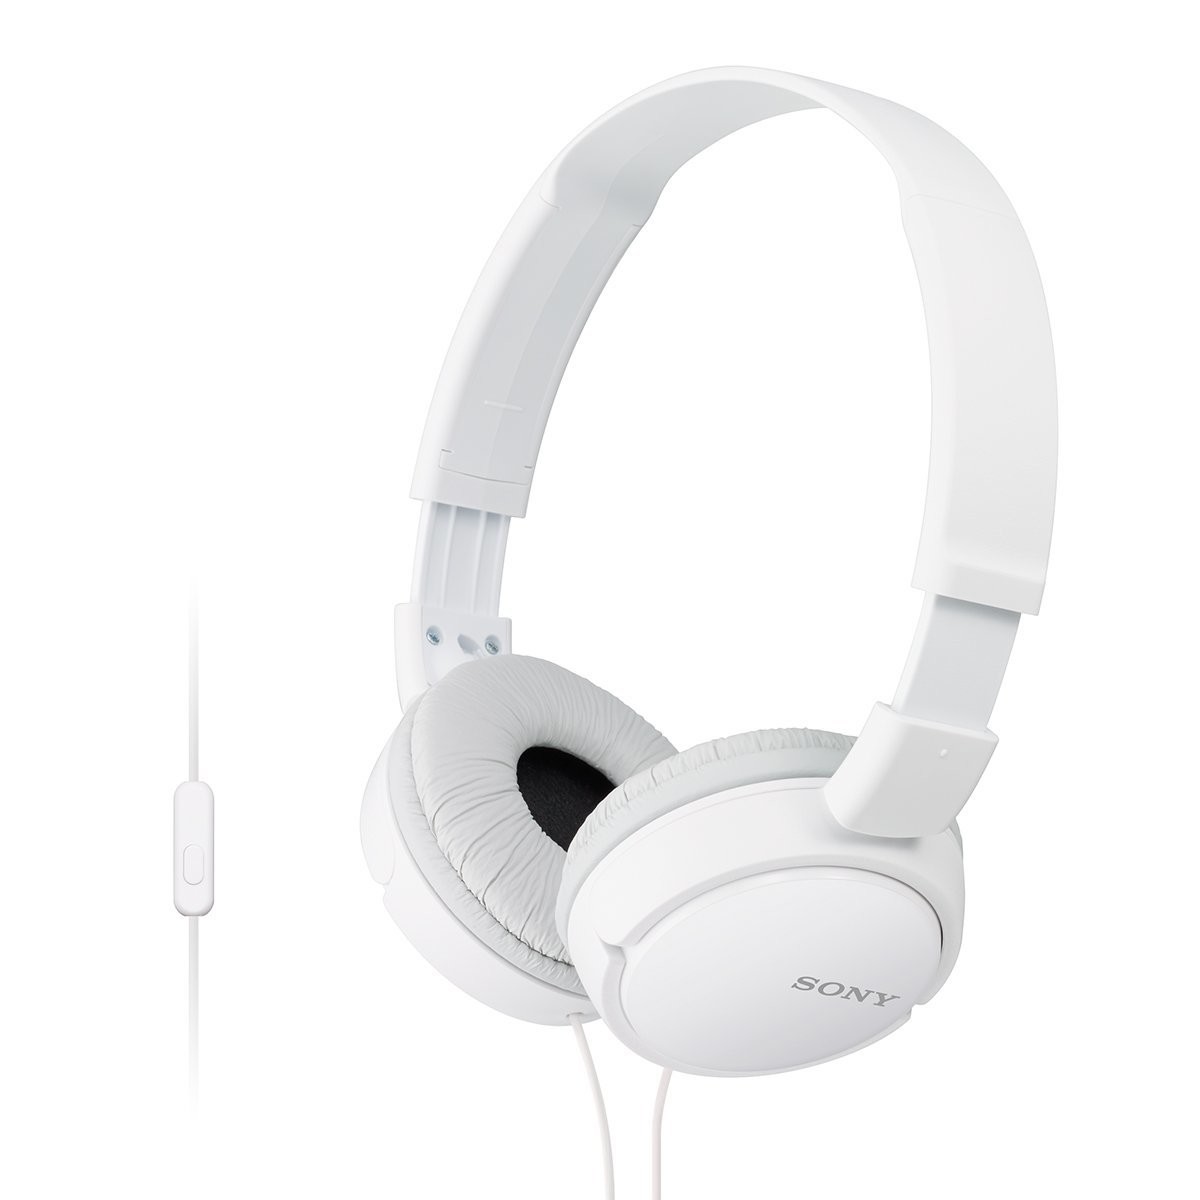 Sony MDR-ZX110AP On-Ear Stereo Headphones, White